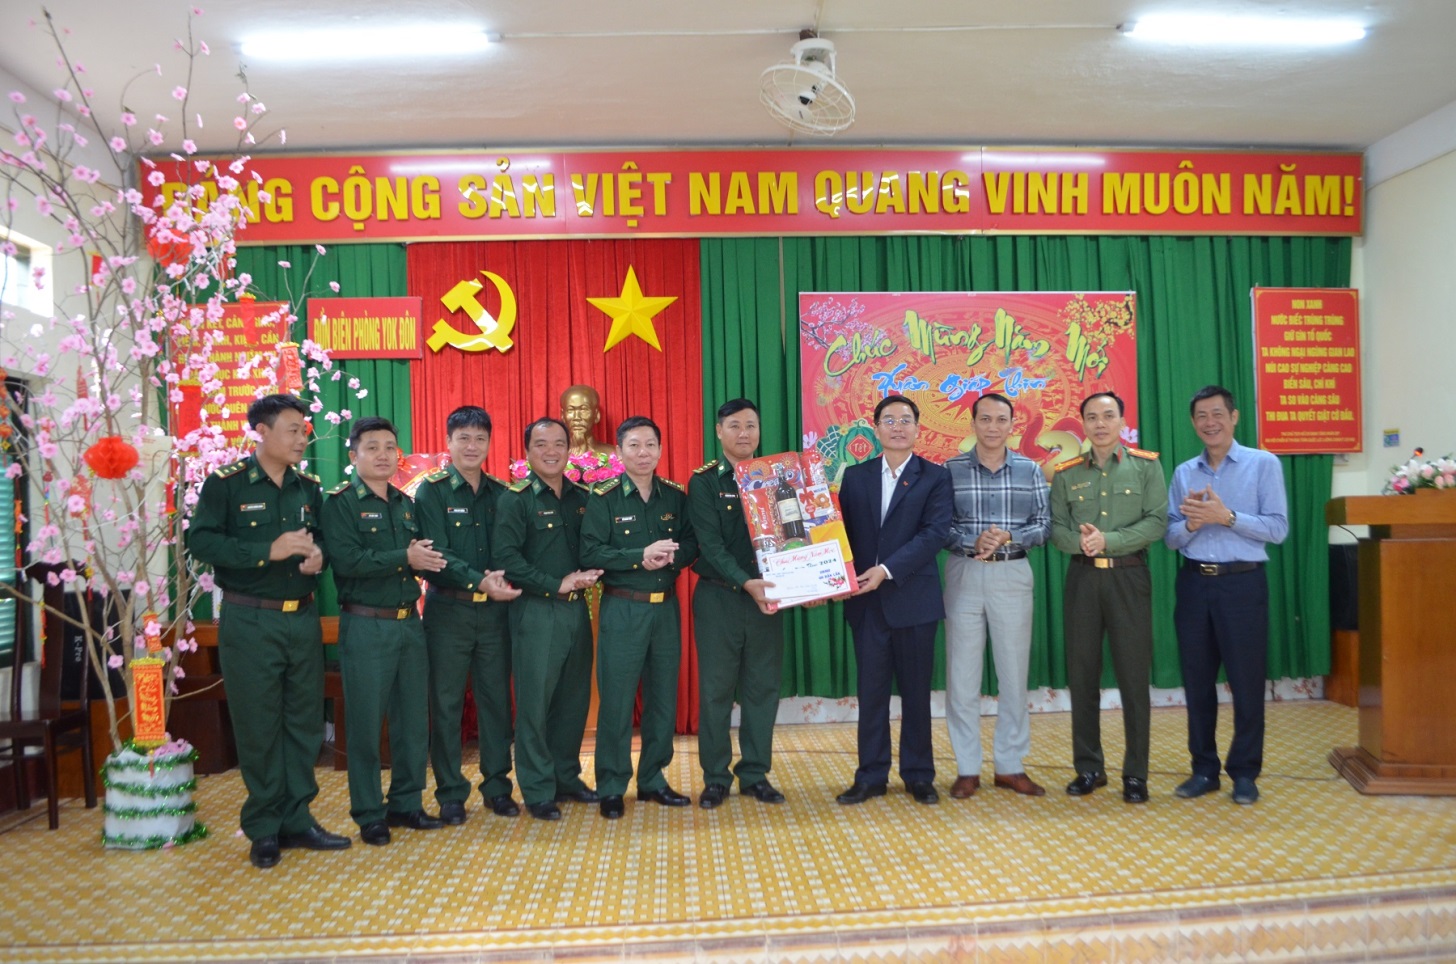 Secretary of the Provincial Party Committee, visited and extended Tet wishes to officers and soldiers at Border Guard Stations